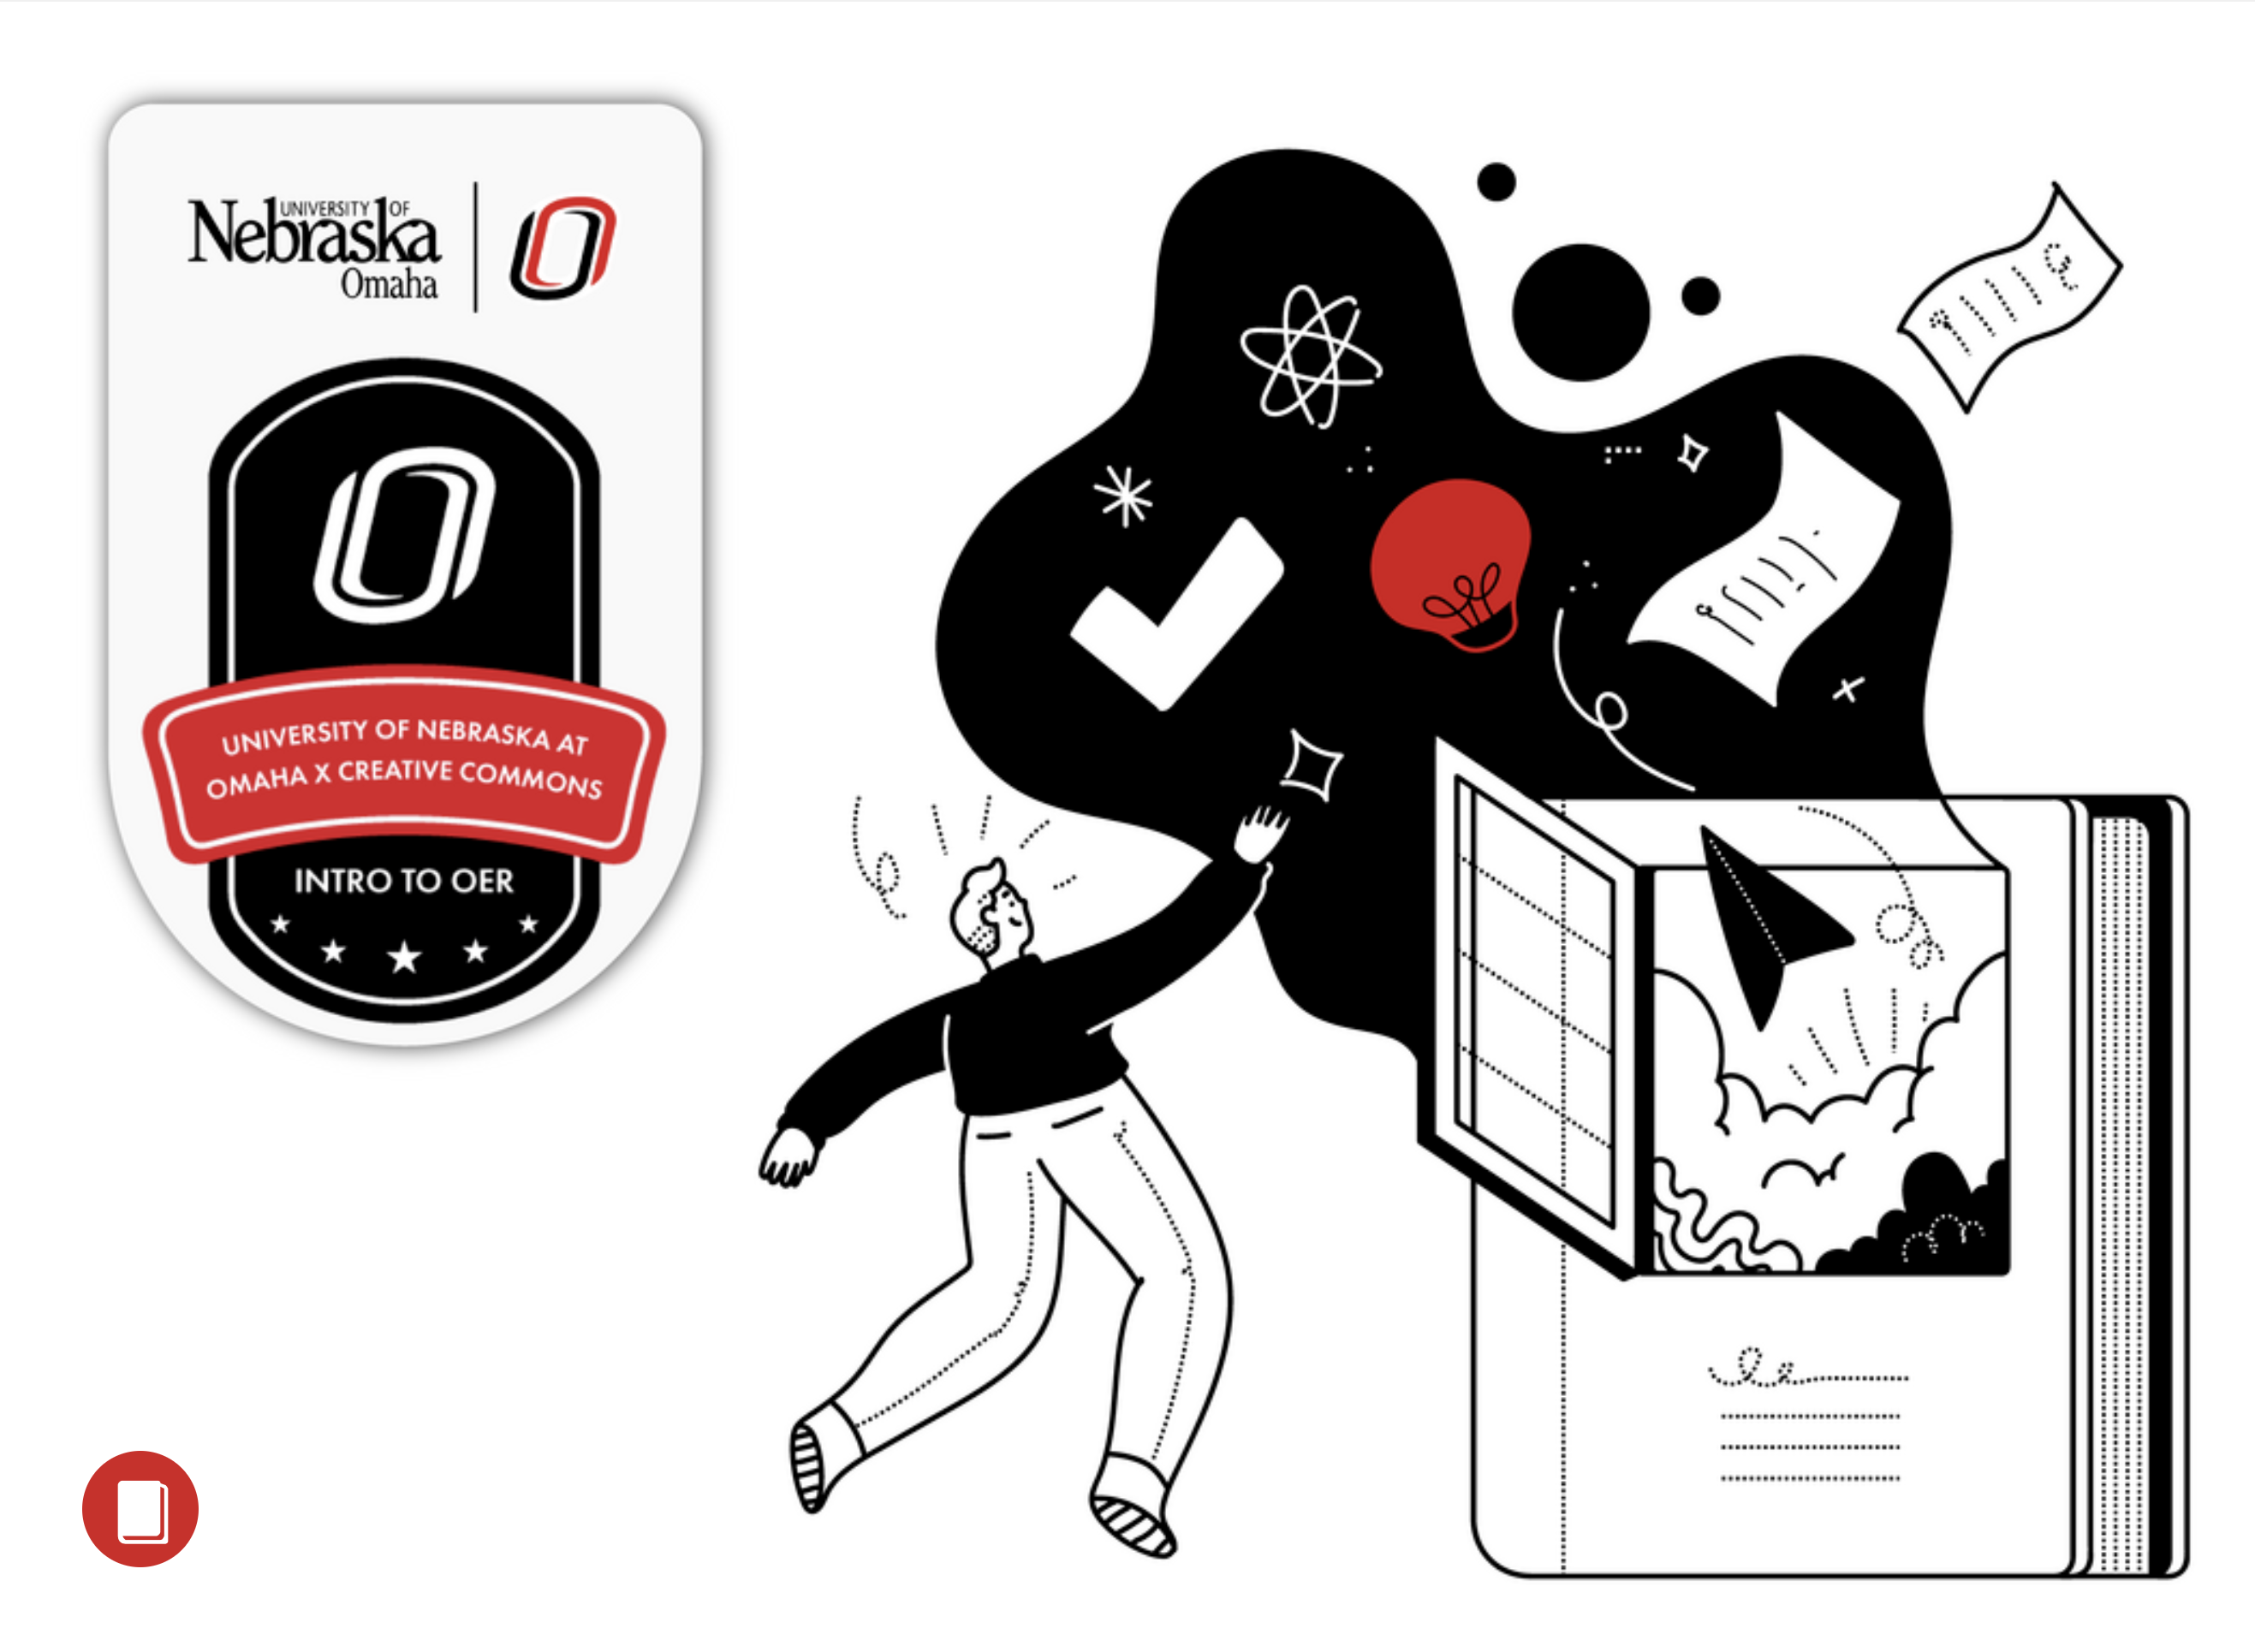 Badge listing “University of Nebraska Omaha x Creative Commons” and “Intro to OER” on left. Image of a person reaching for images associated with learning, flowing out of a book on the right. Images include a check mark, paper, light bulb band atom symbol.